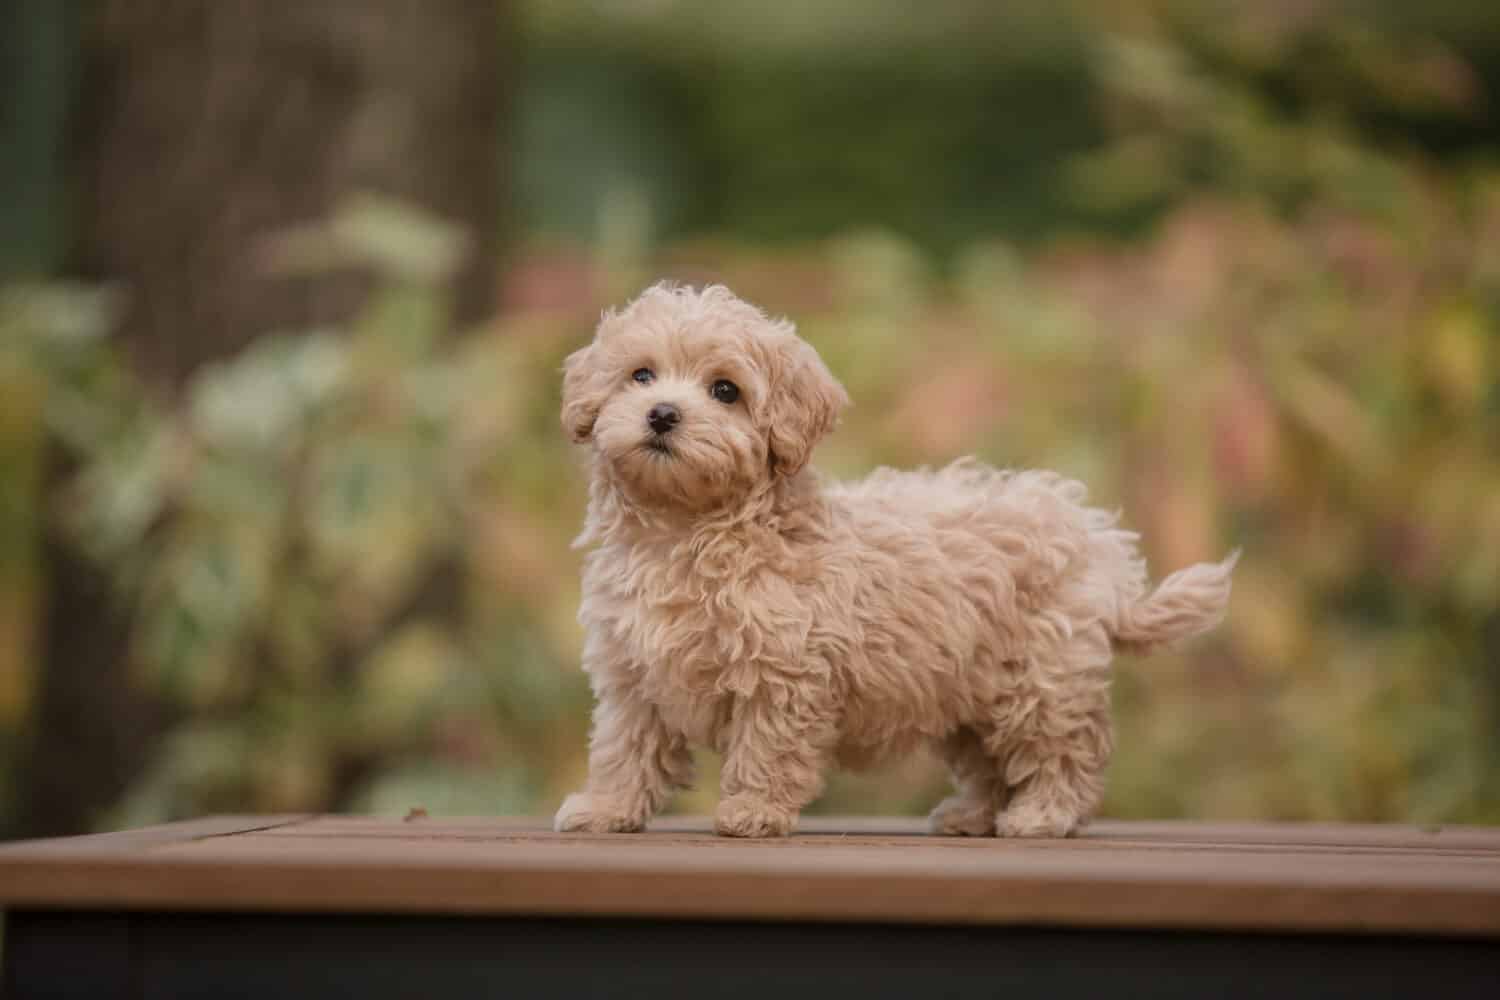 Adorable Maltese and Poodle mix Puppy or Maltipoo dog.